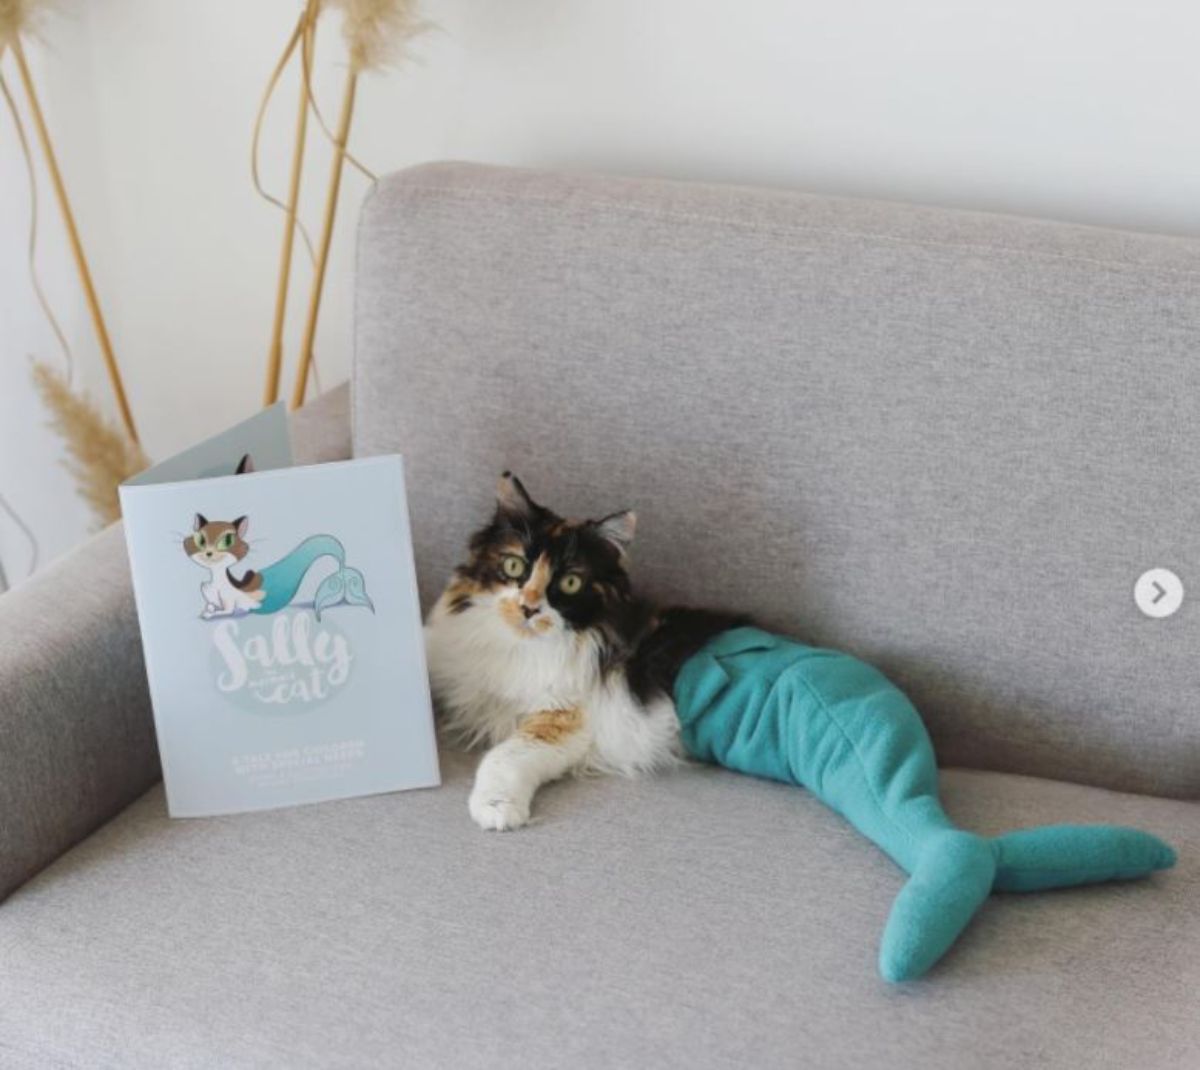 white black and orange cat wearing a blue-green mermaid tail laying on a grey sofa next to a sally the cat book